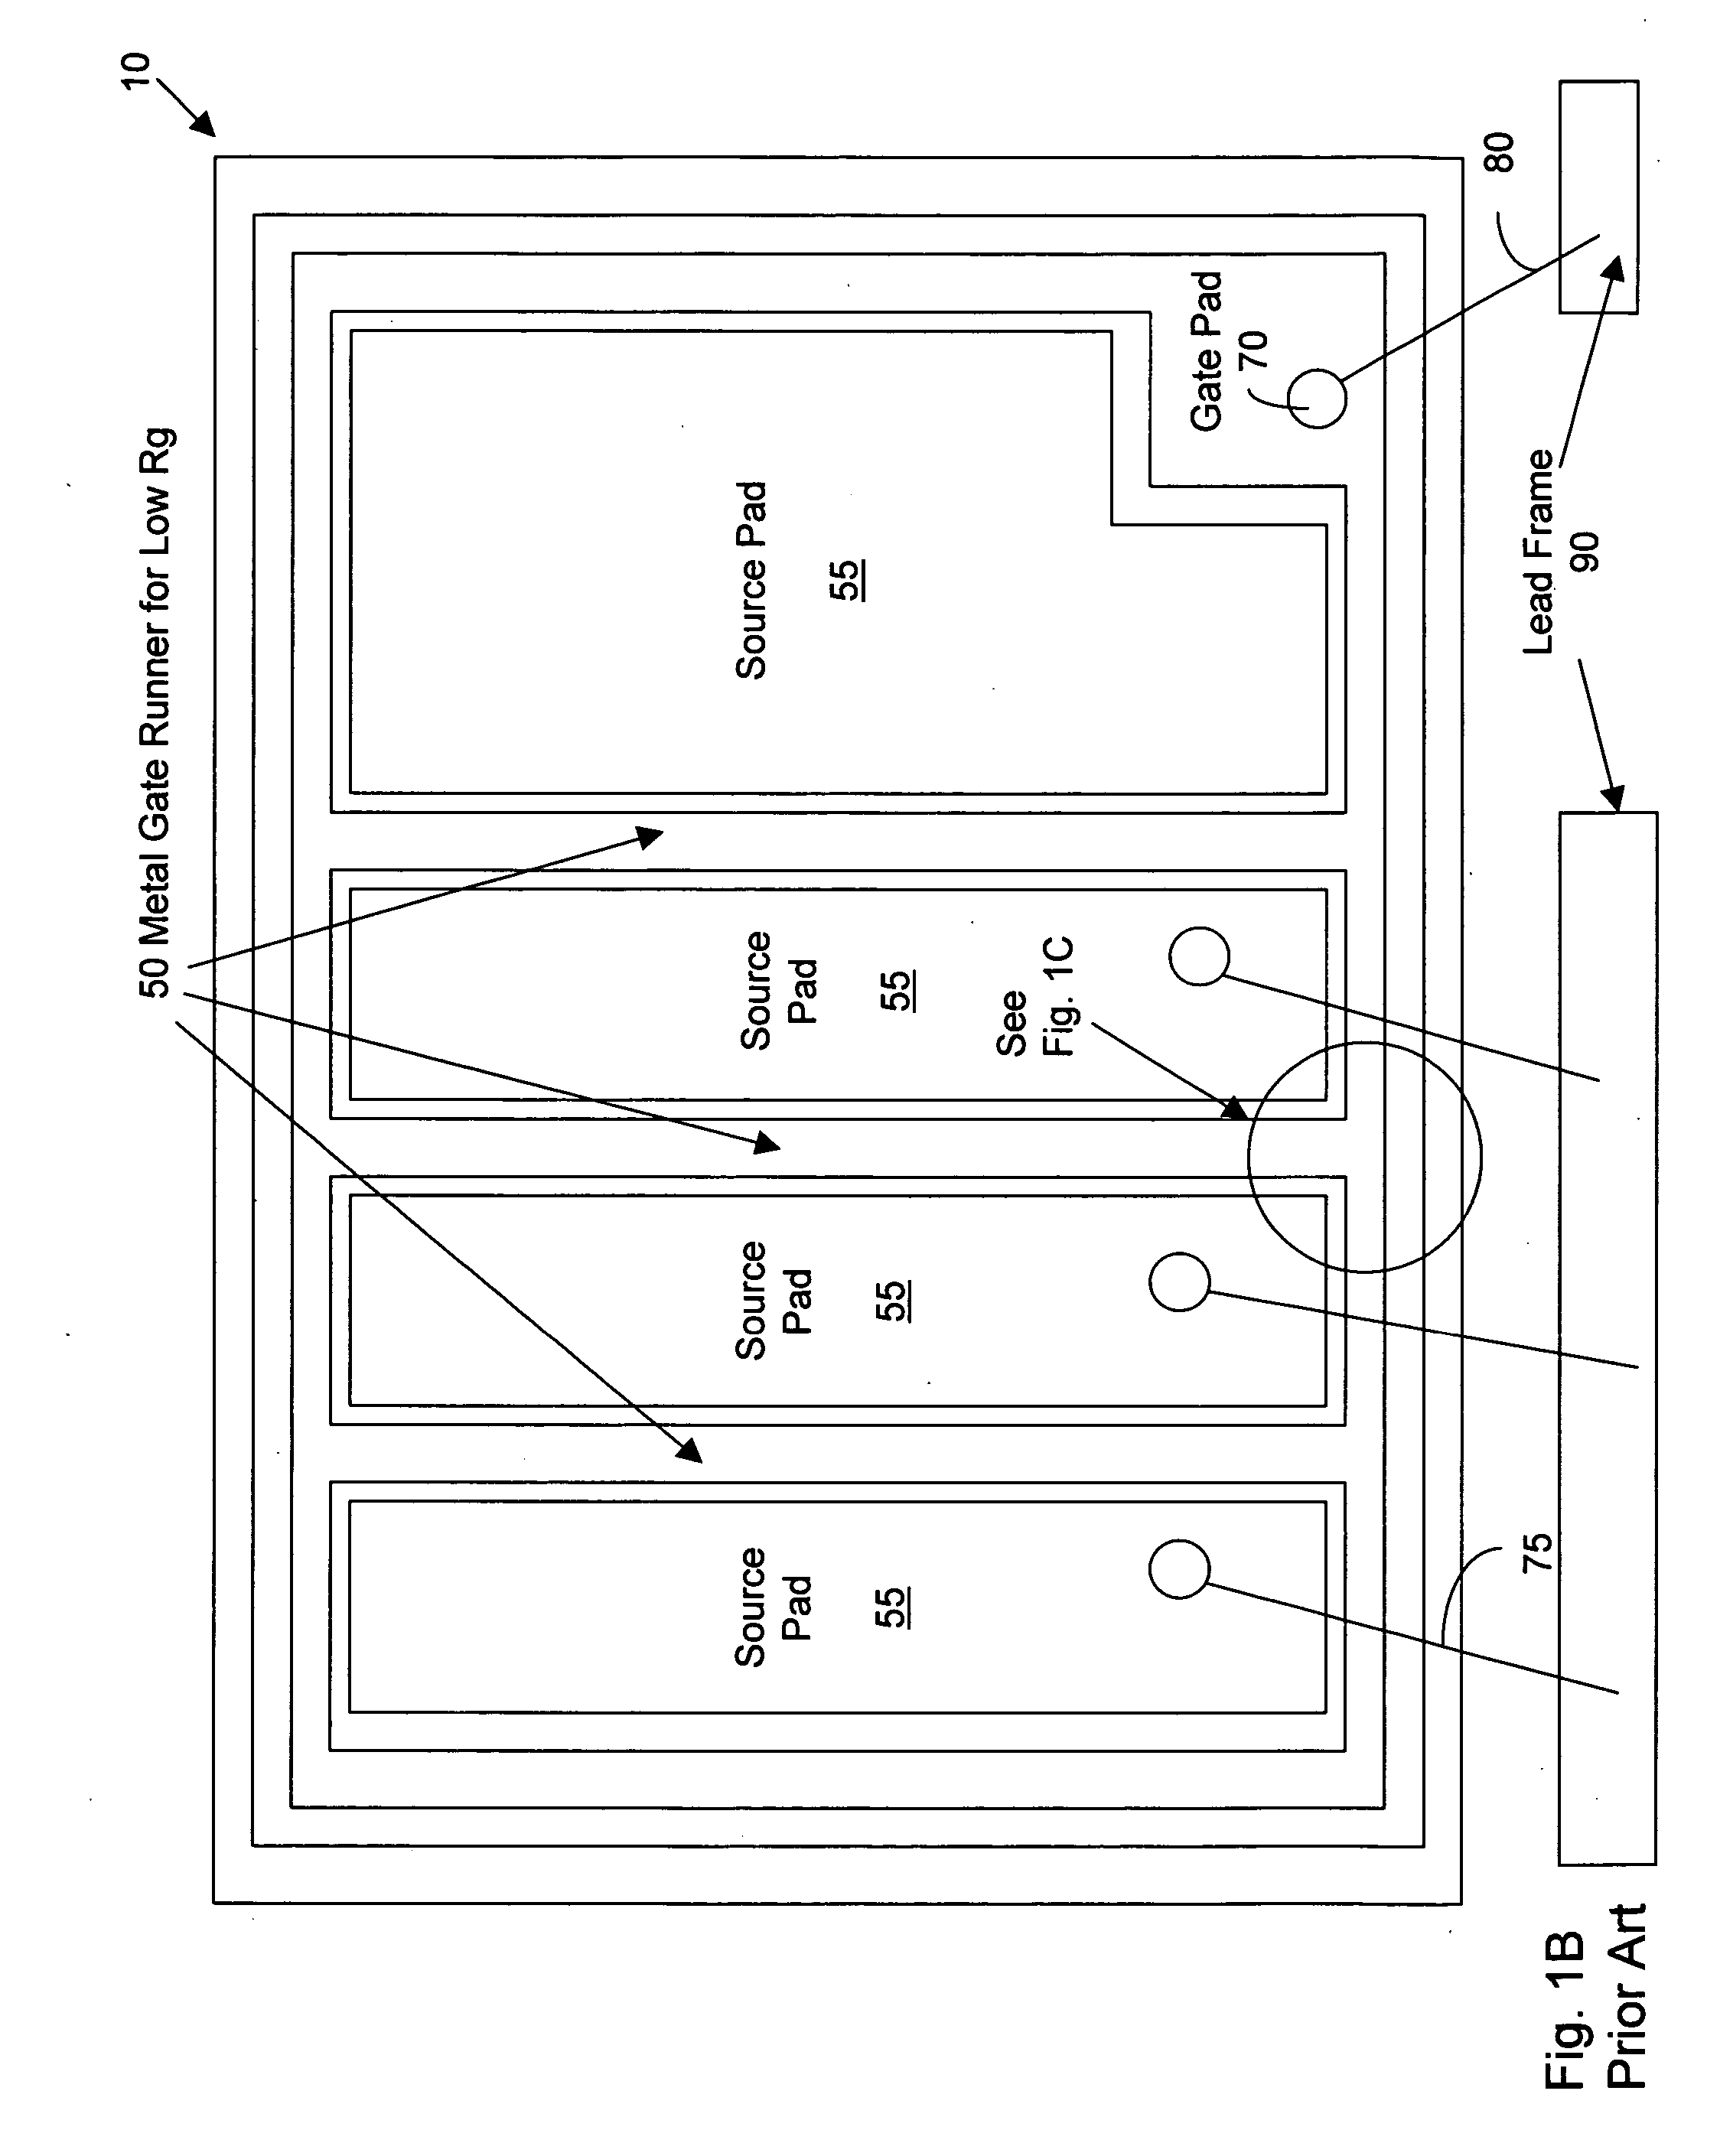 Gate contact and runners for high density trench MOSFET